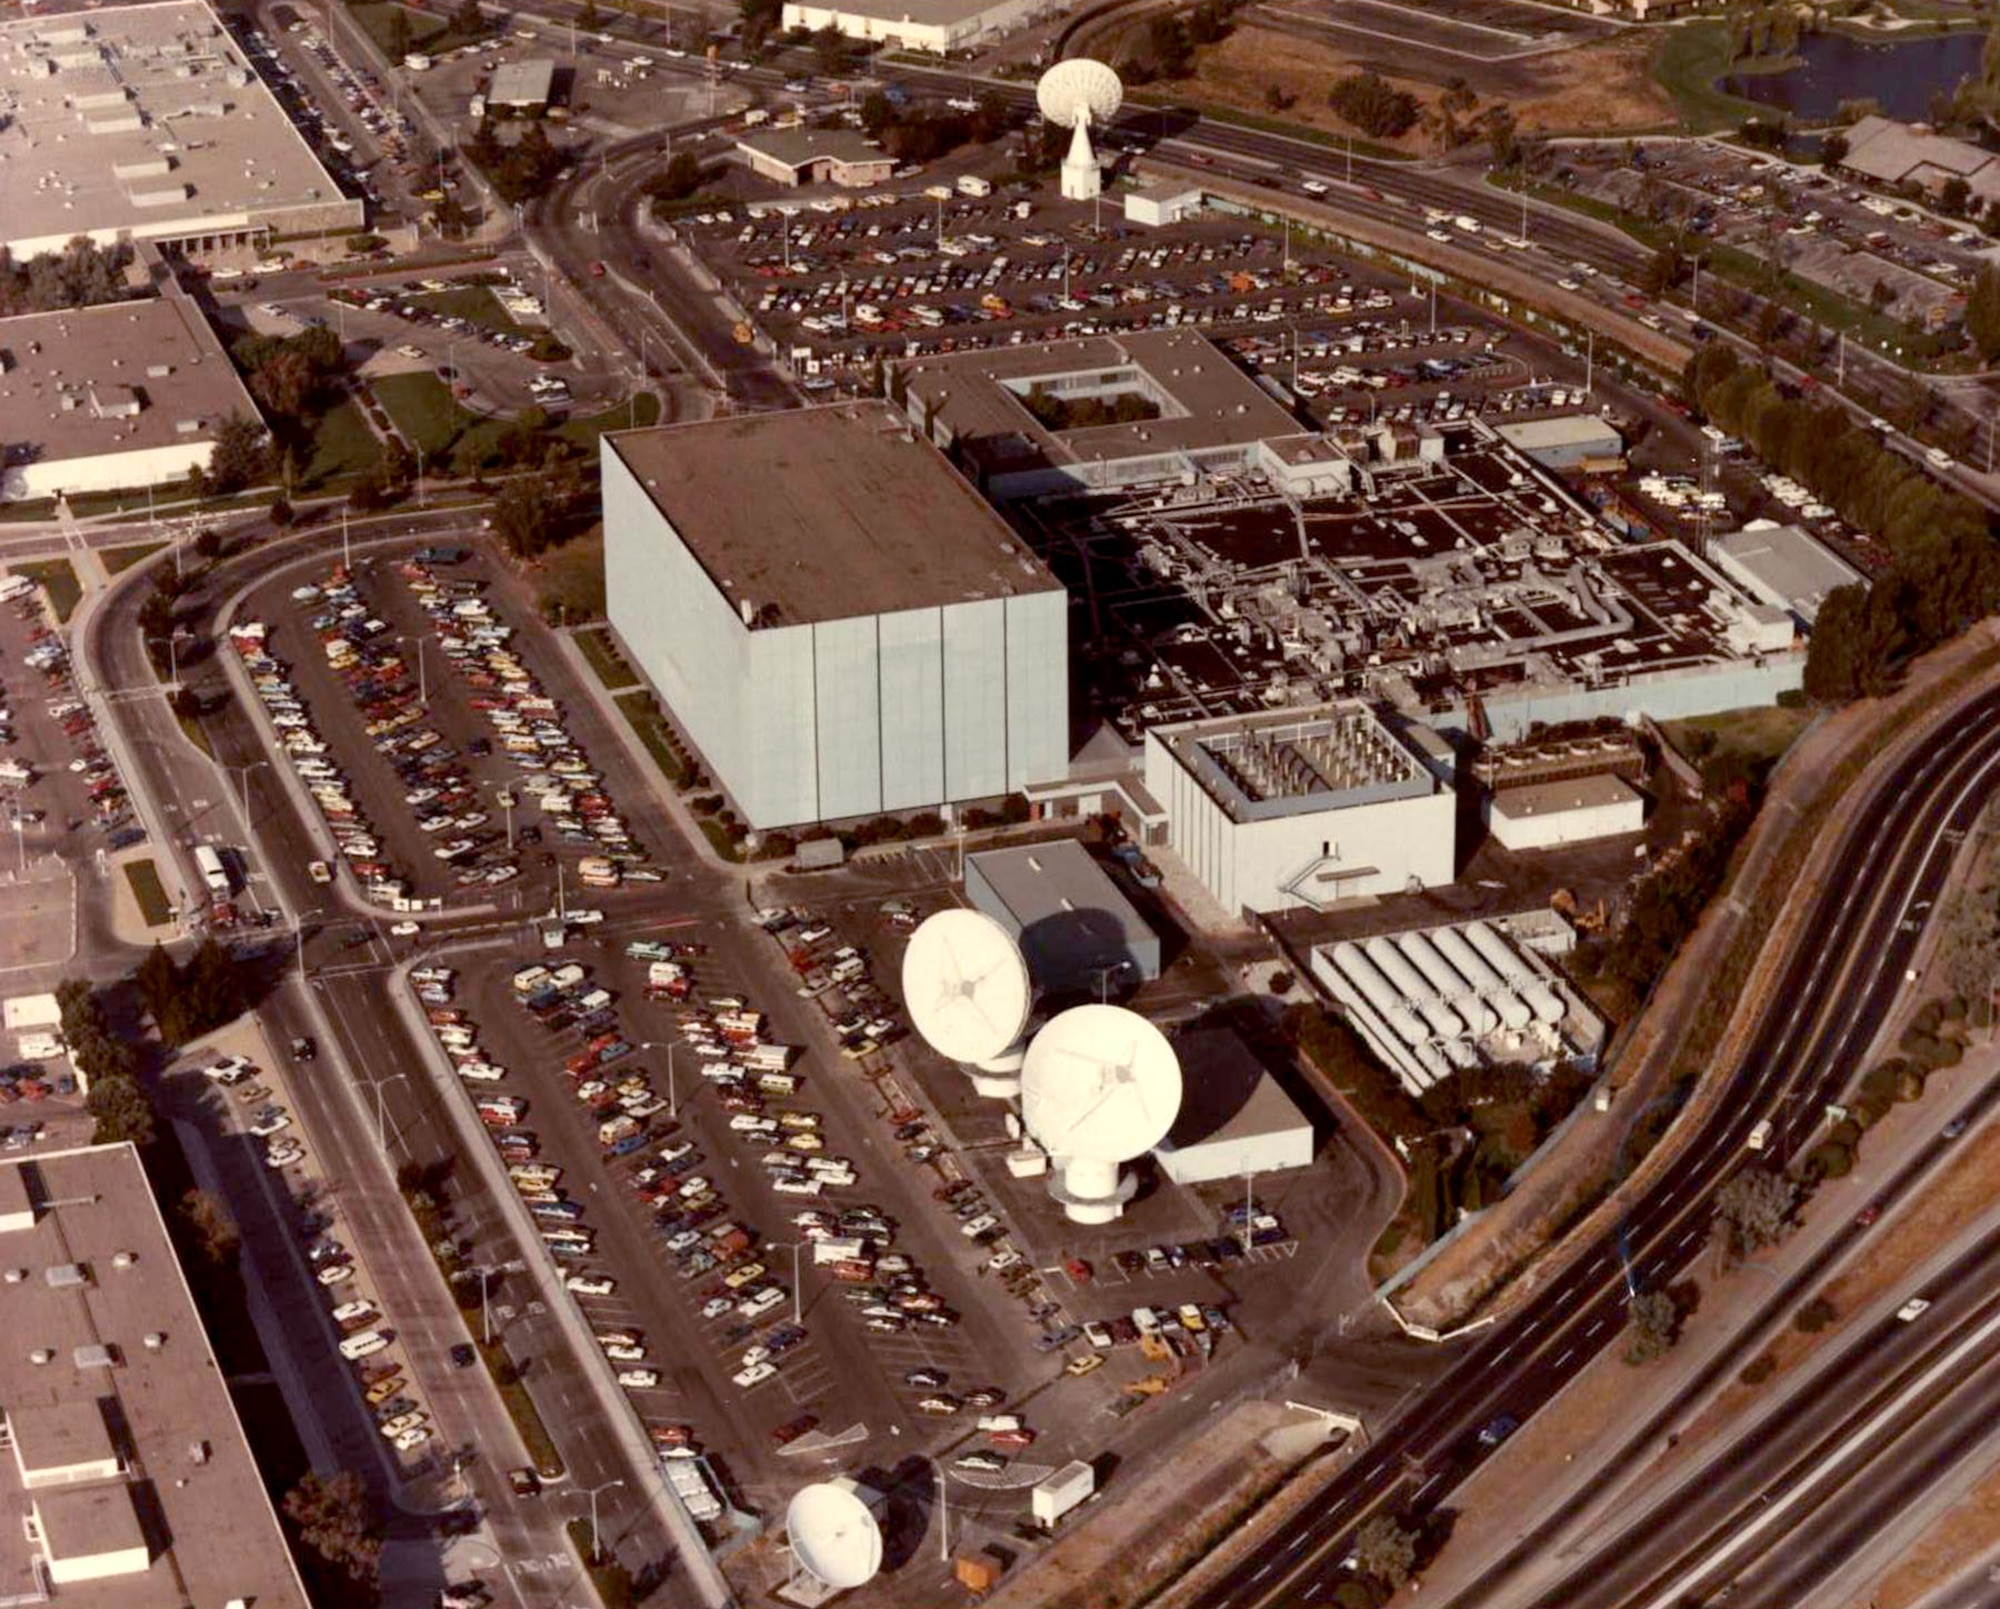 The Air Force Satellite Test Center, Sunnyvale, Calif. This facility was popularly known as the “Blue Cube.” (Photo courtesy of kadiak.org)